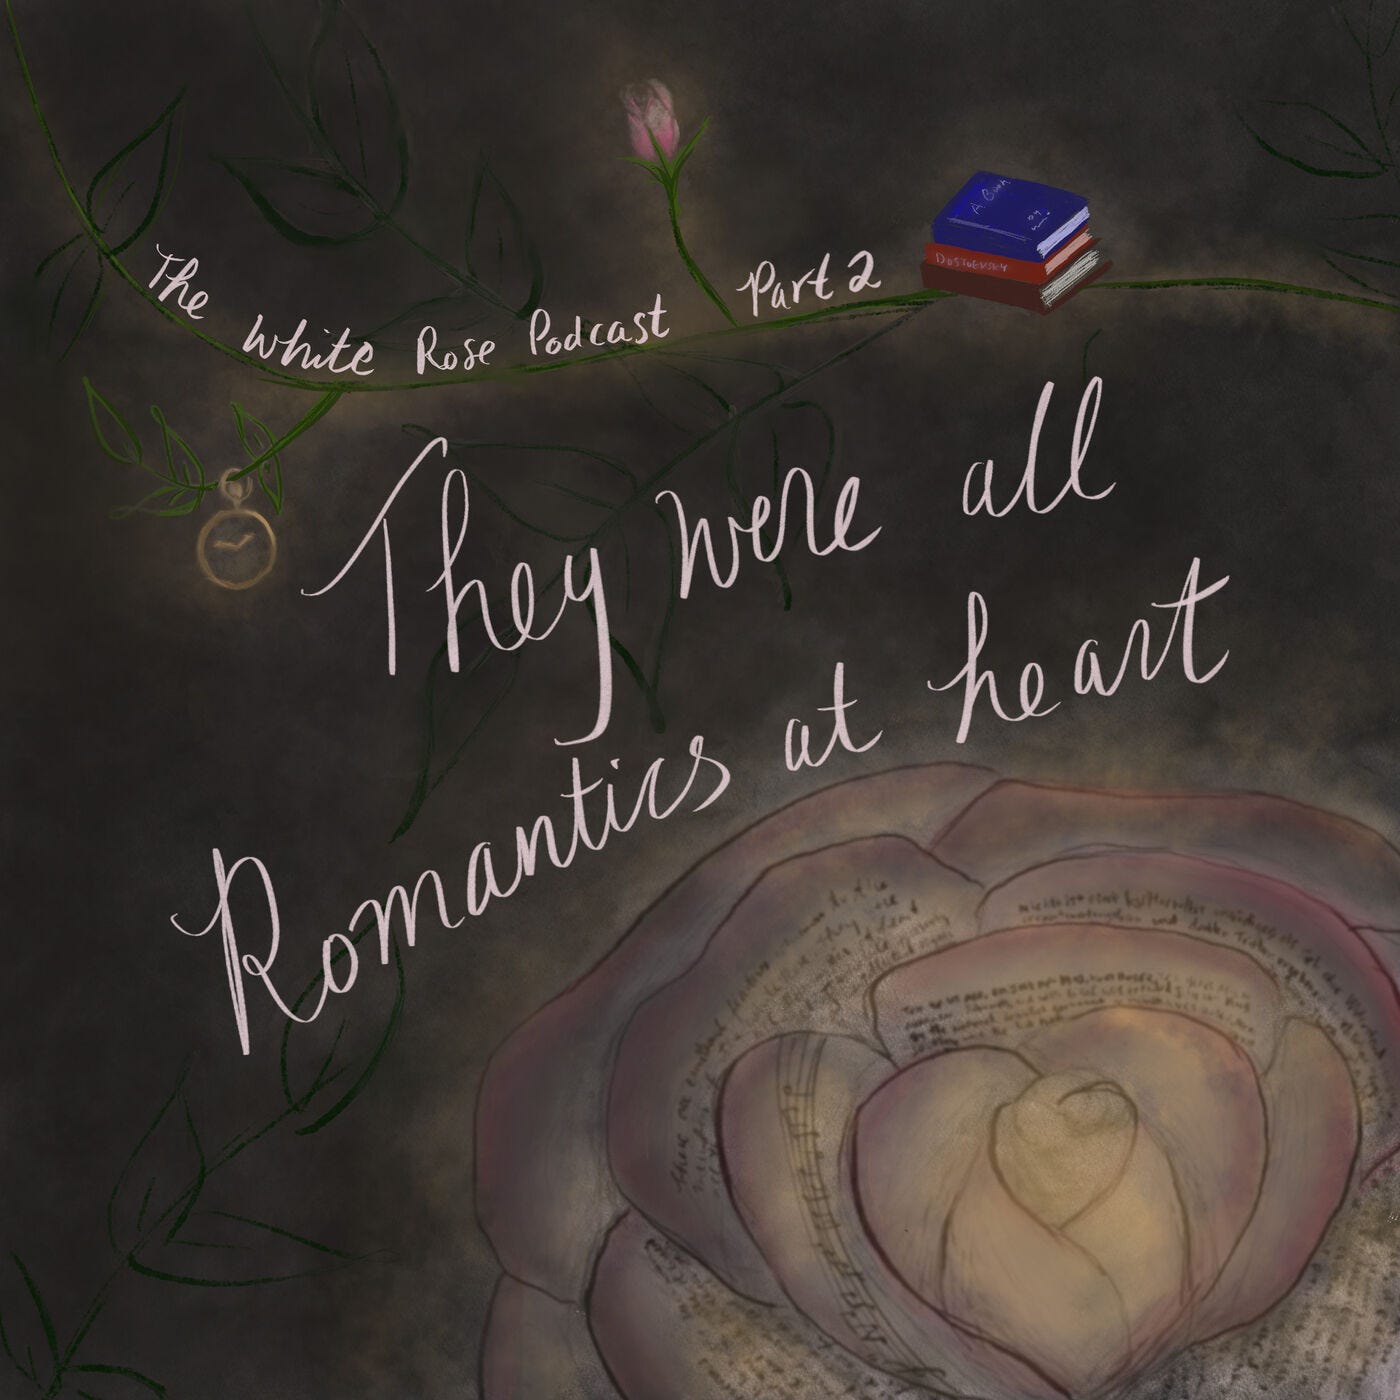 Part 2: They were all romantics at heart